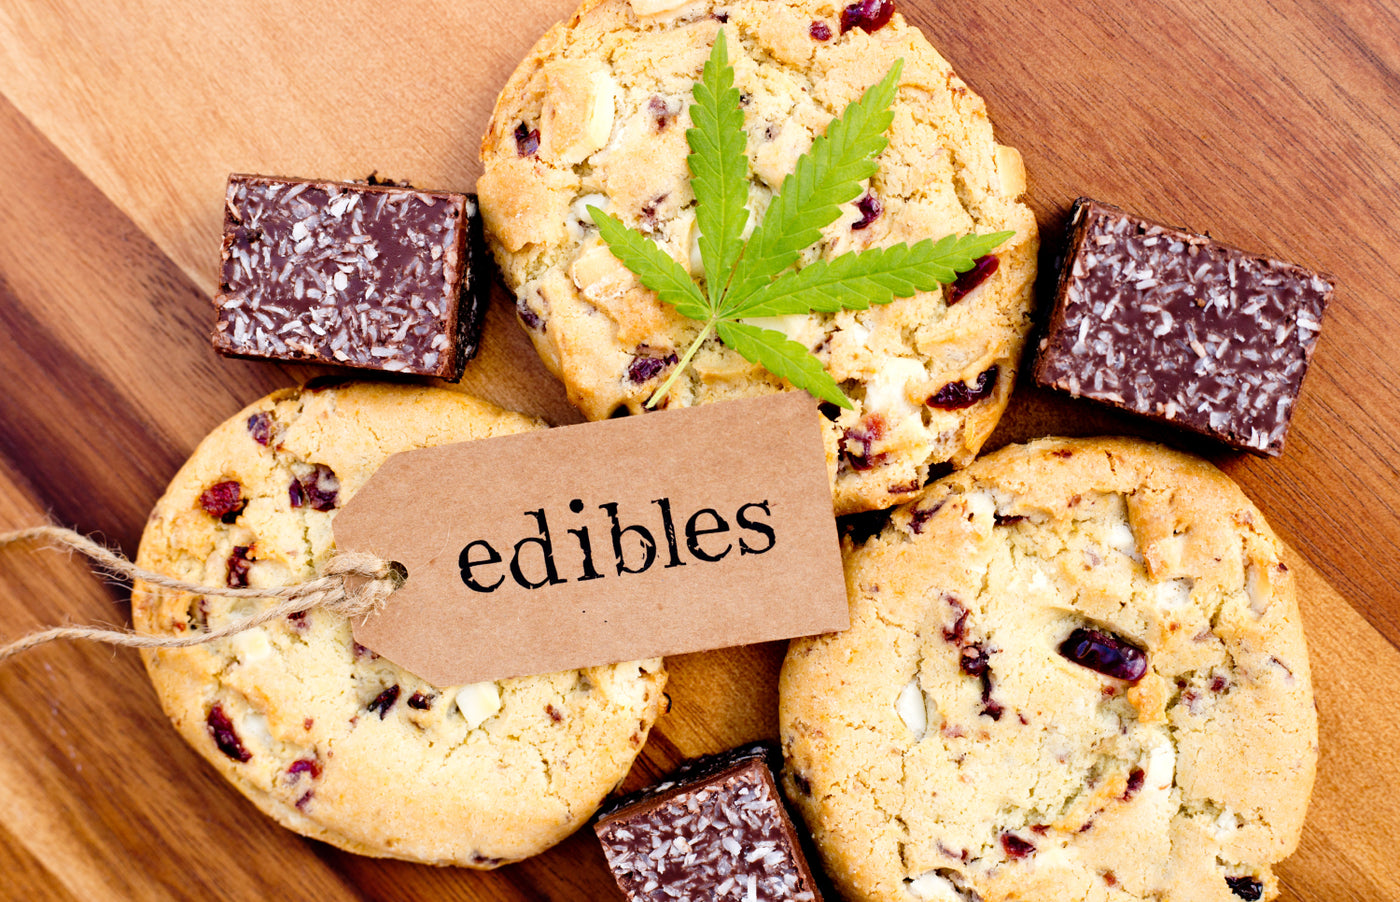 How long do edibles take to kick in?